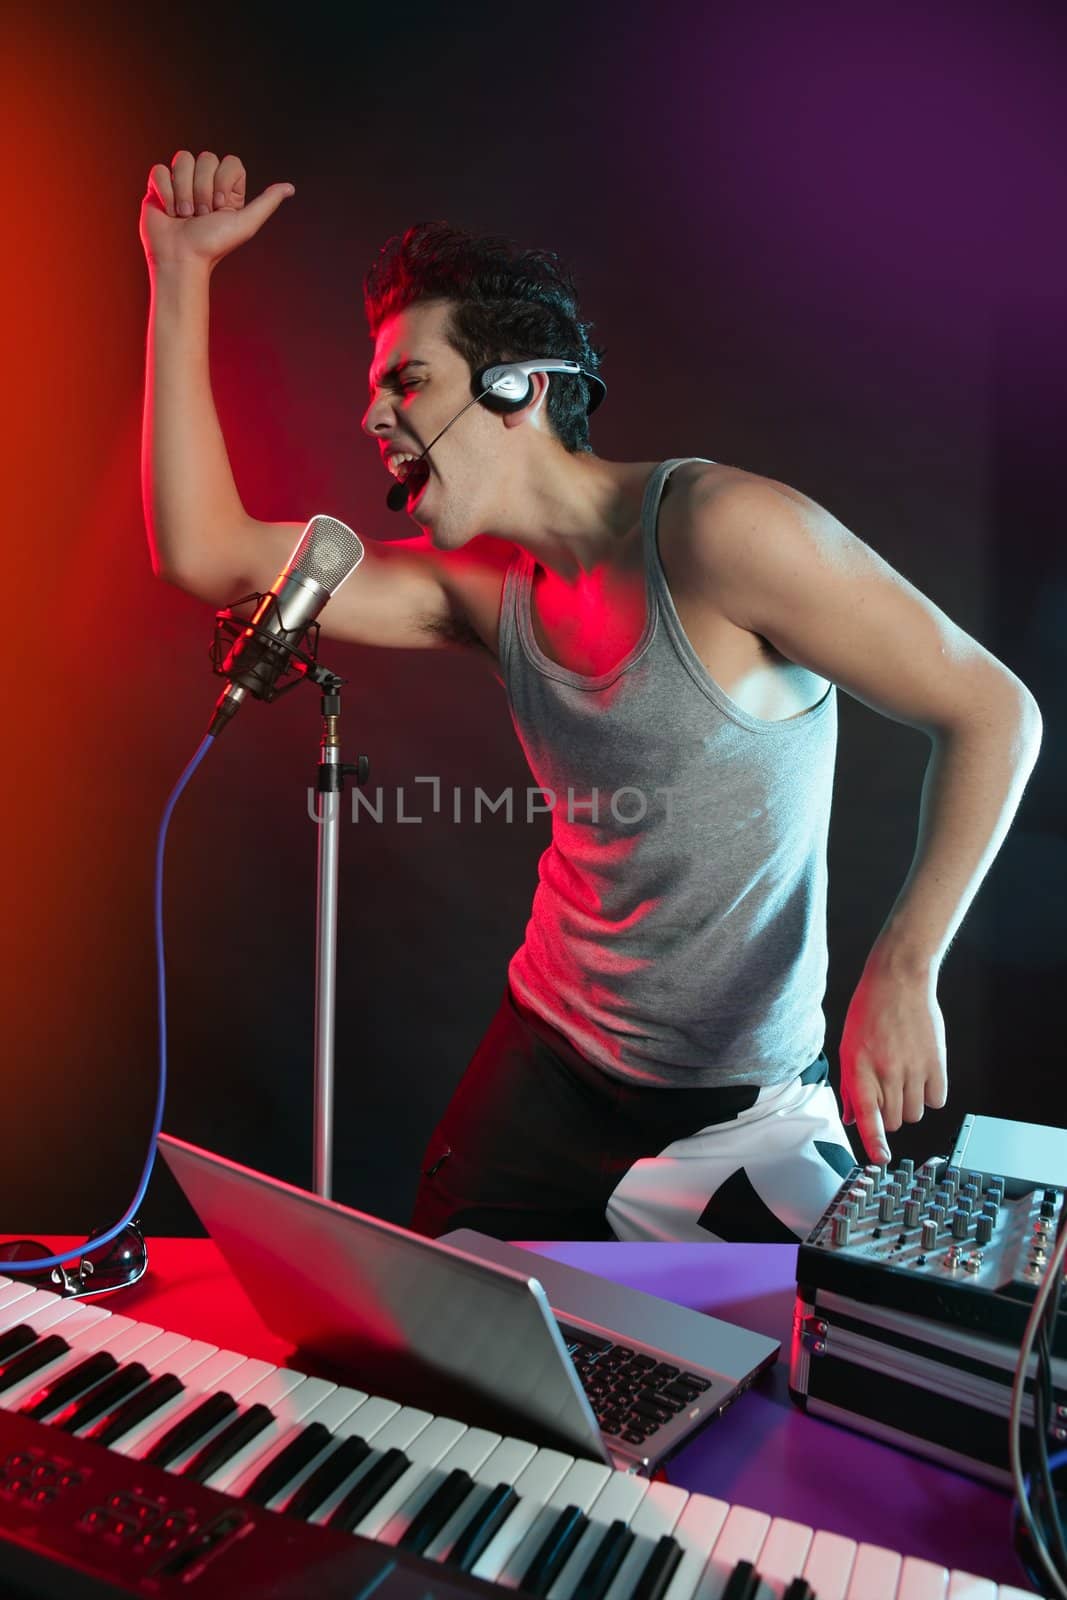 Dj with colorful light and music mixing equipment by lunamarina